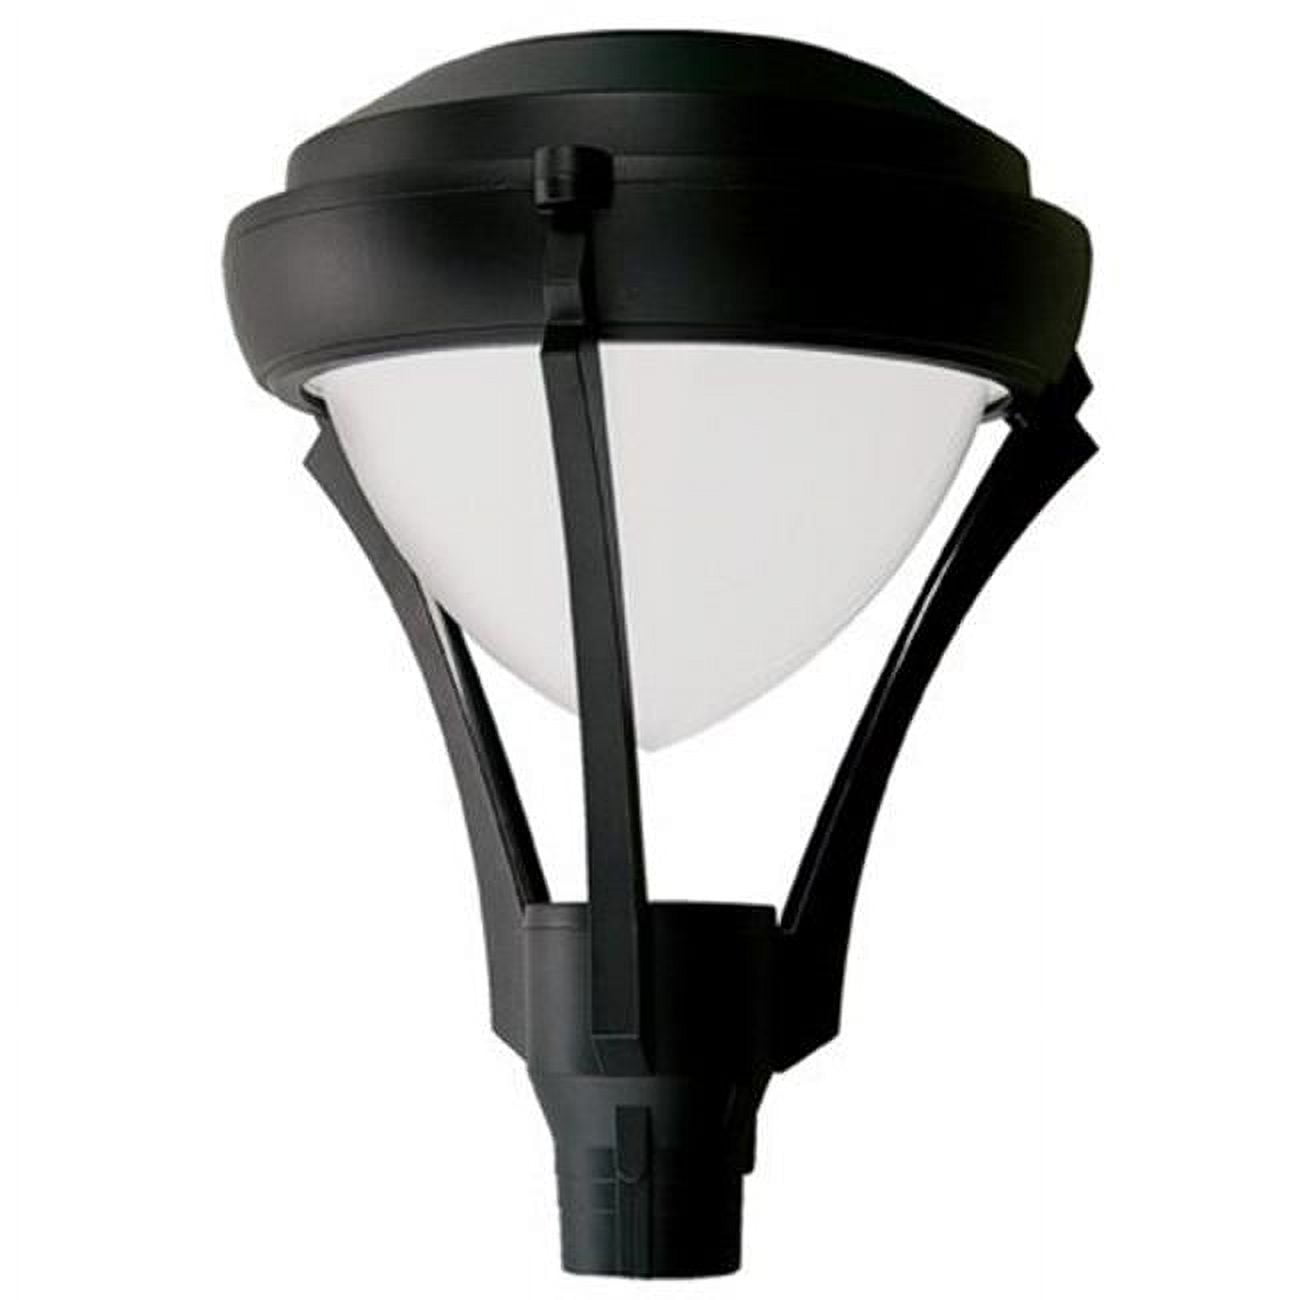 Picture of Dabmar Lighting GM597-B-MT 70W Powder Coated Cast Aluminum Post Top Light Fixture with Metal Halide Lamp, Black - 27.95 x 21.65 x 21.65 in.